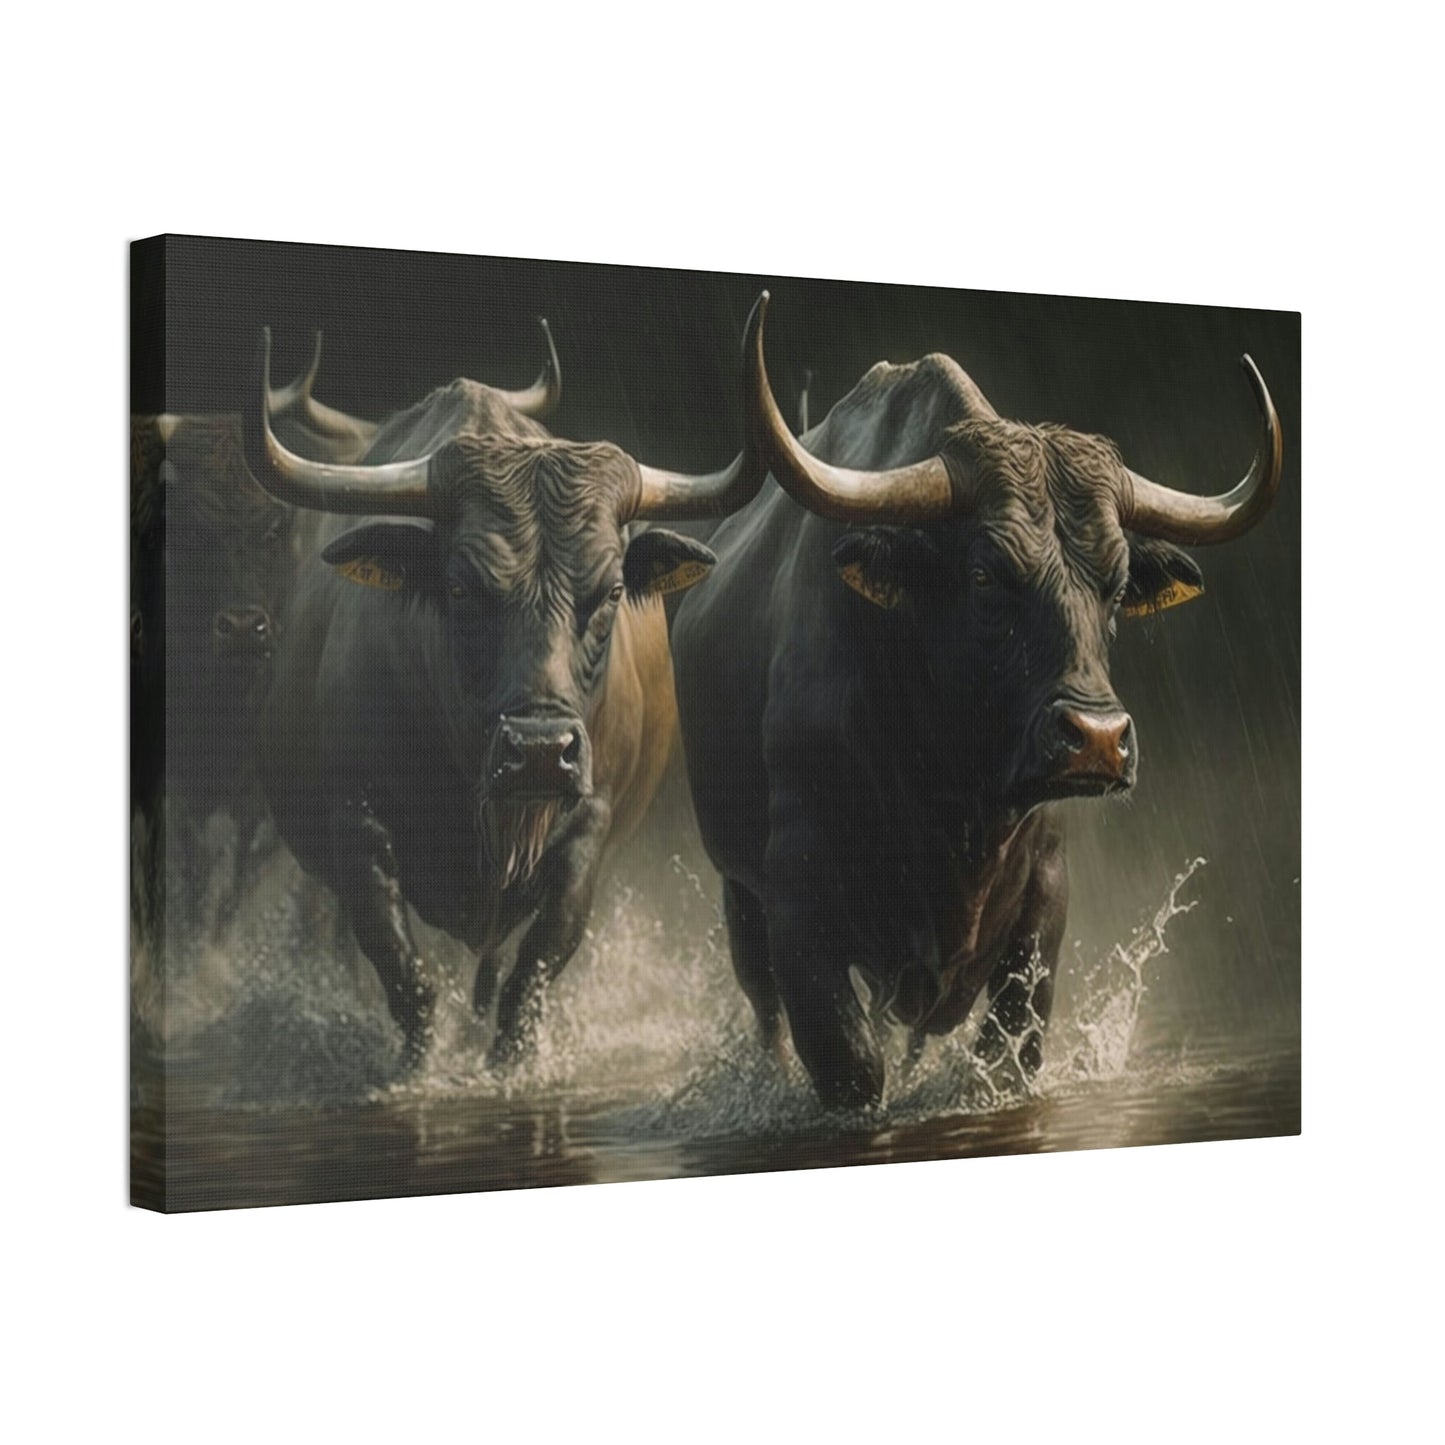 Wild Bulls Running: Poster & Canvas Print of Cattle Stampede